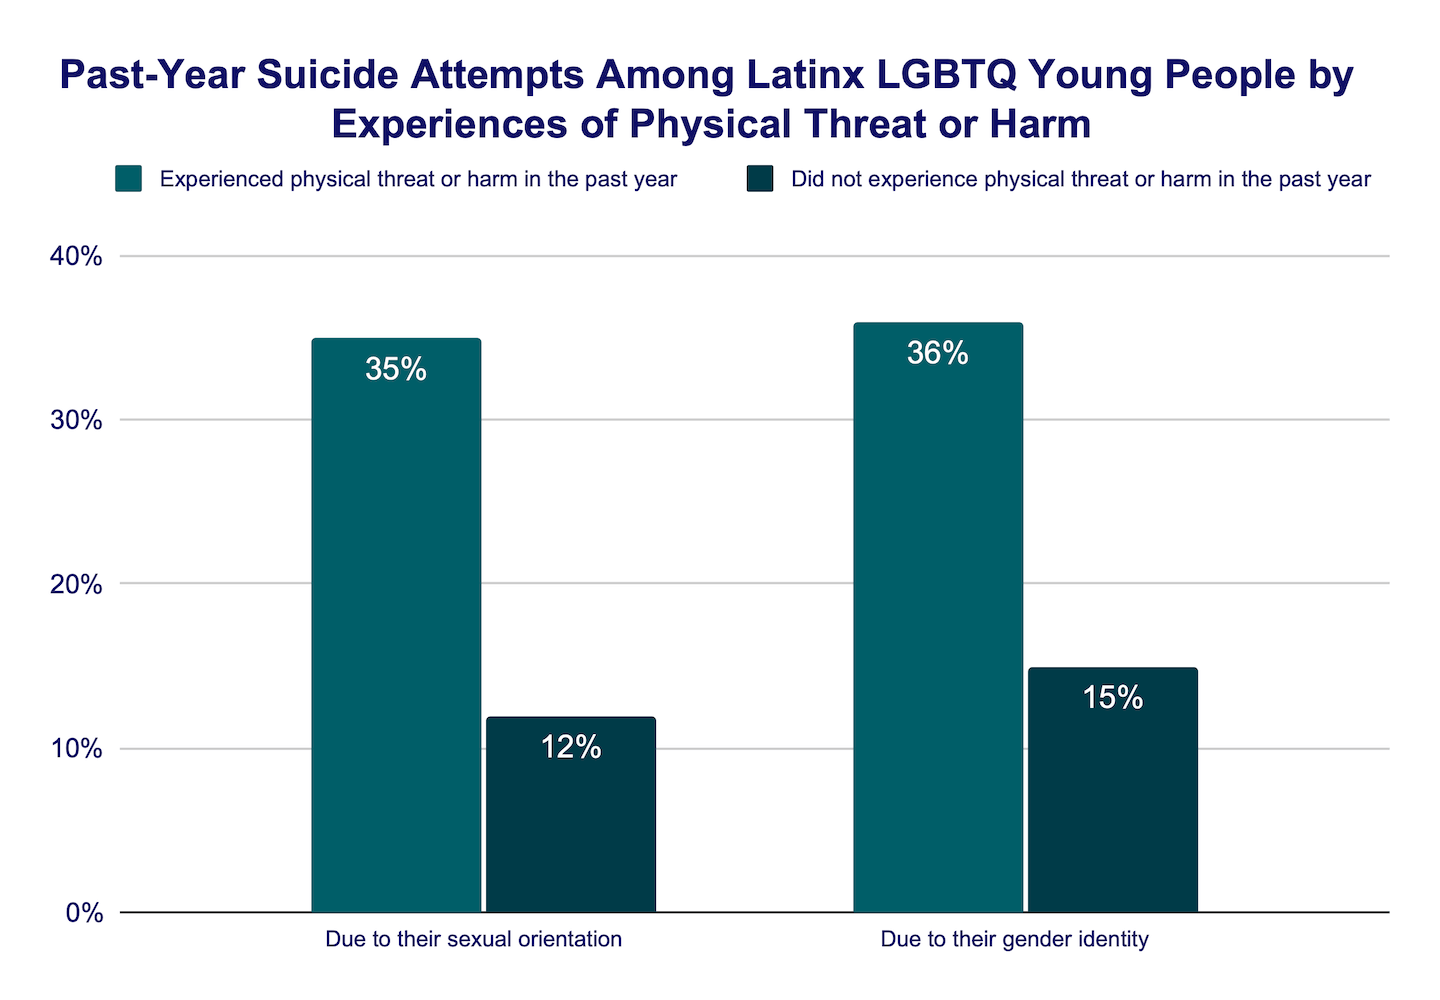 Past-year suicide attempts among Latinx LGBTQ young people by experience of physical threat or harm bar graph